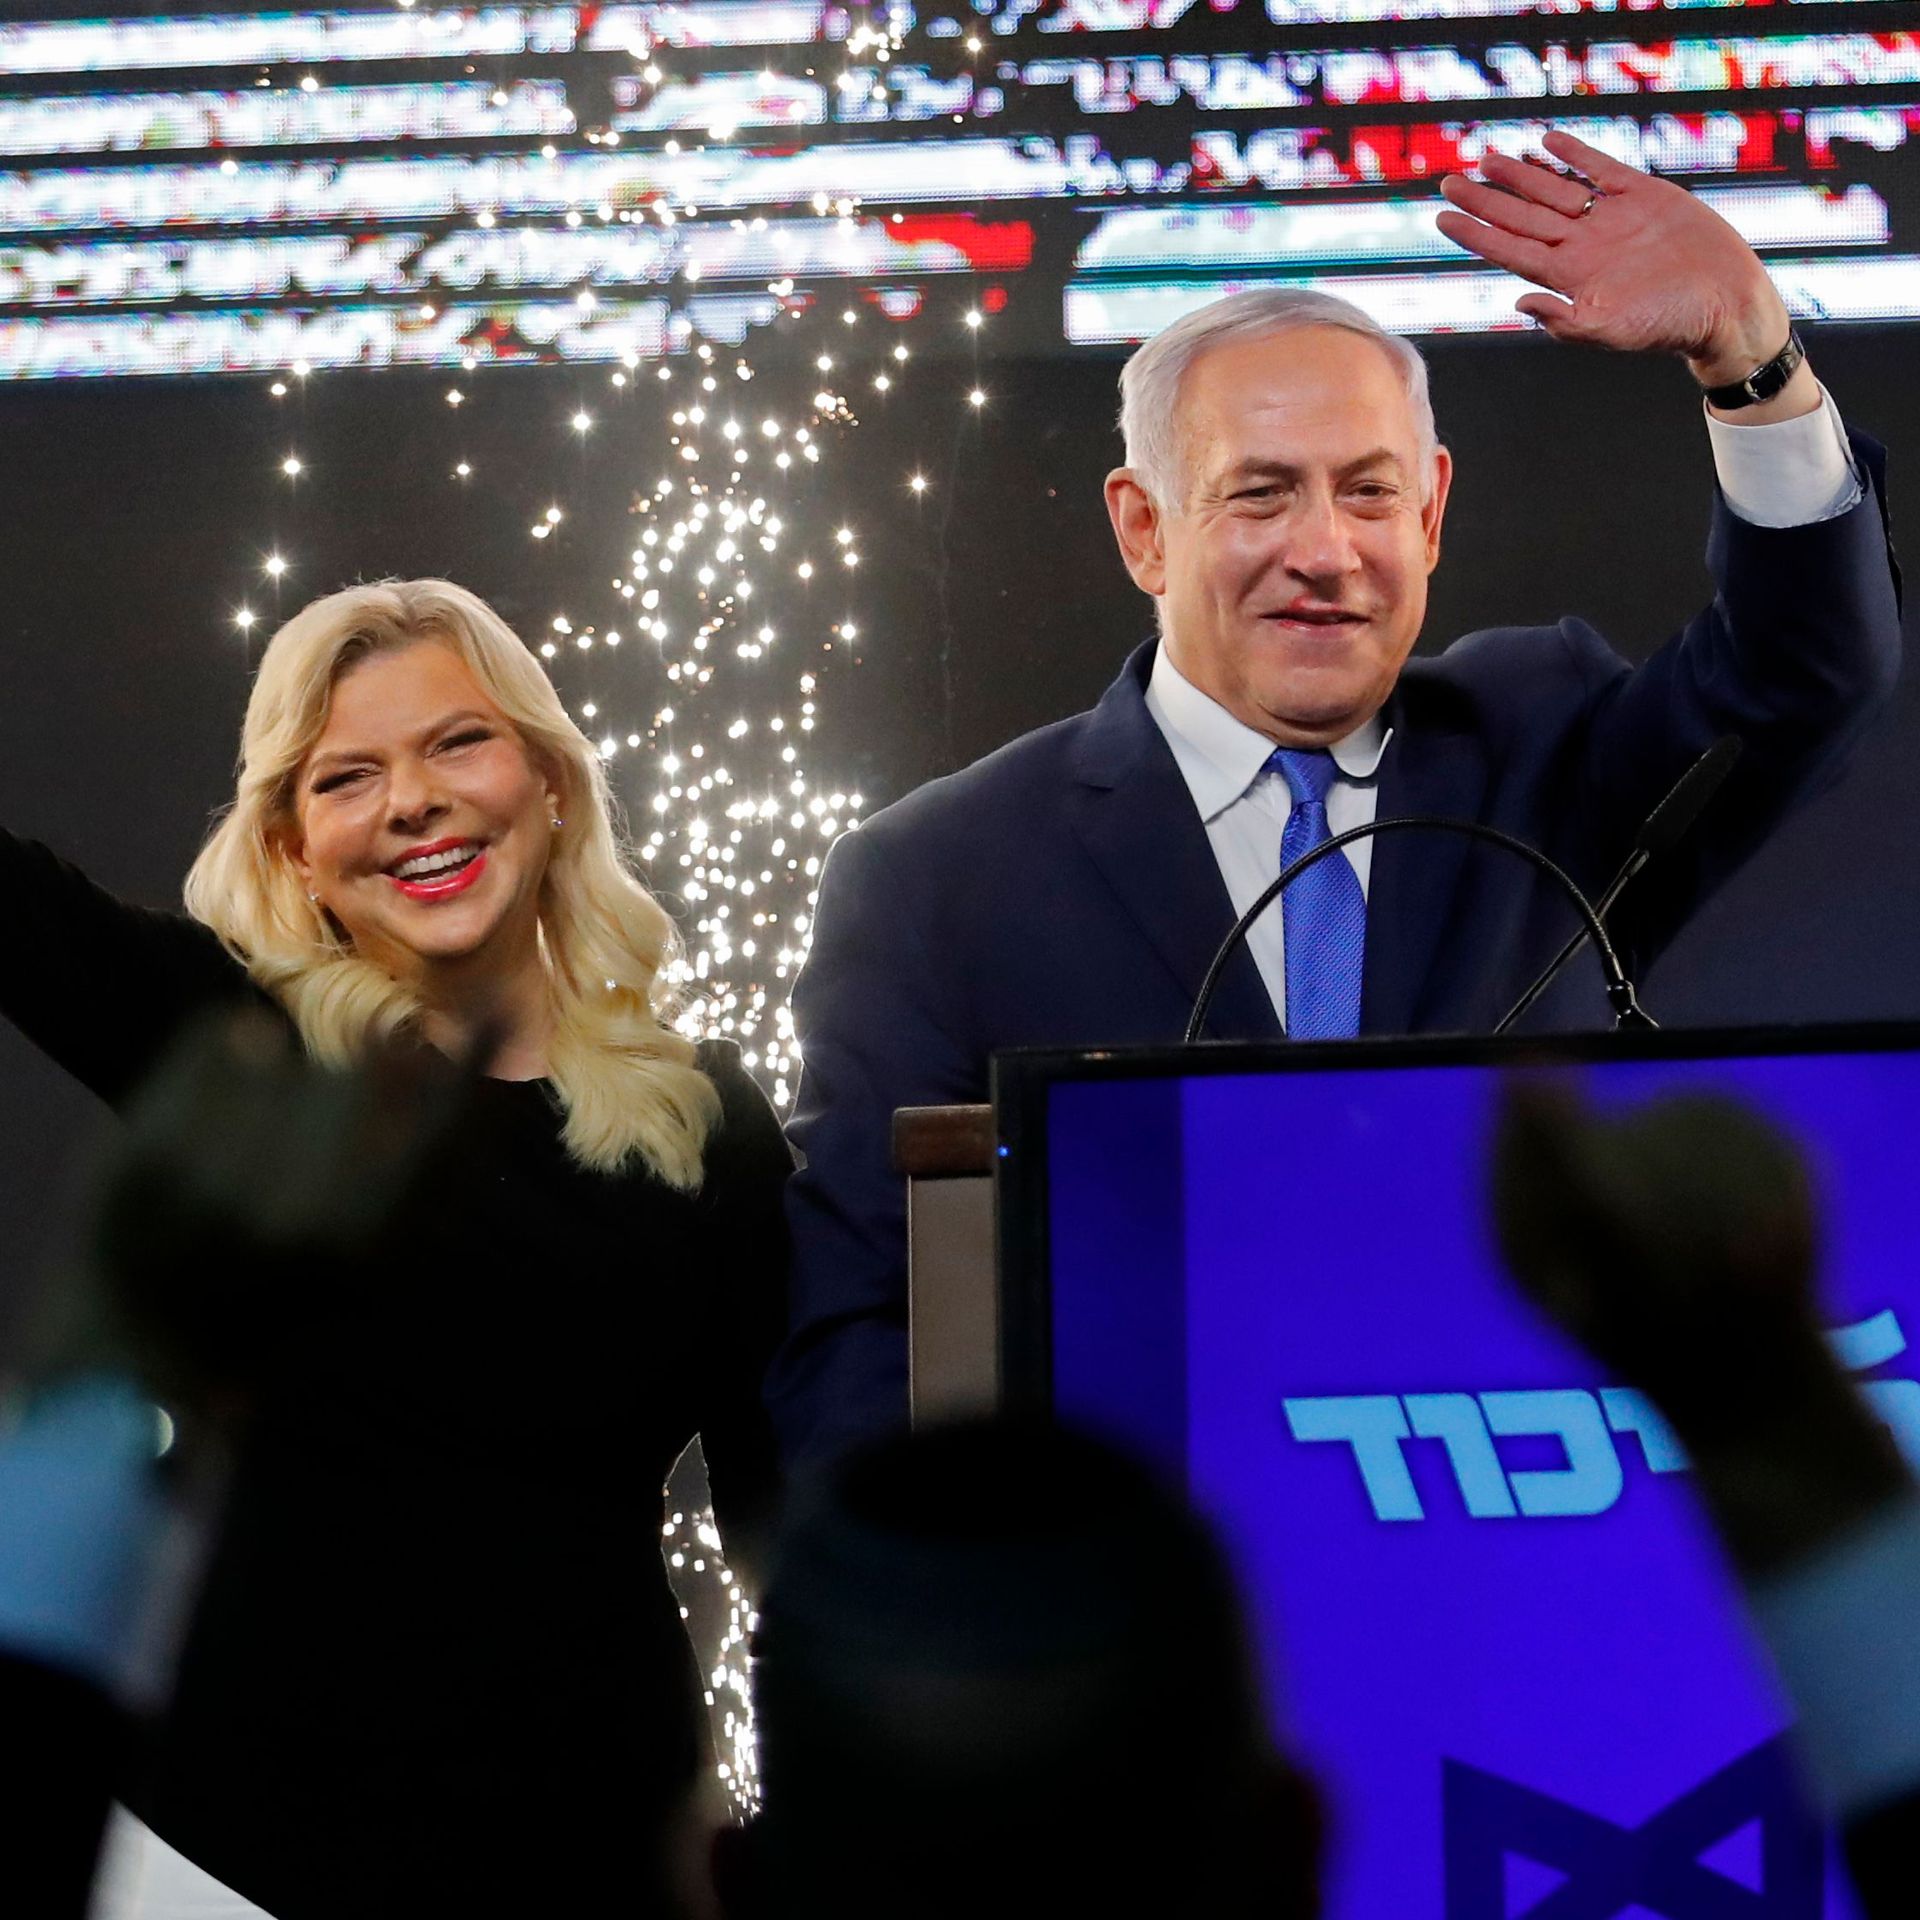 Benjamin Netanyahu and his wife, Sara, on stage before supporters